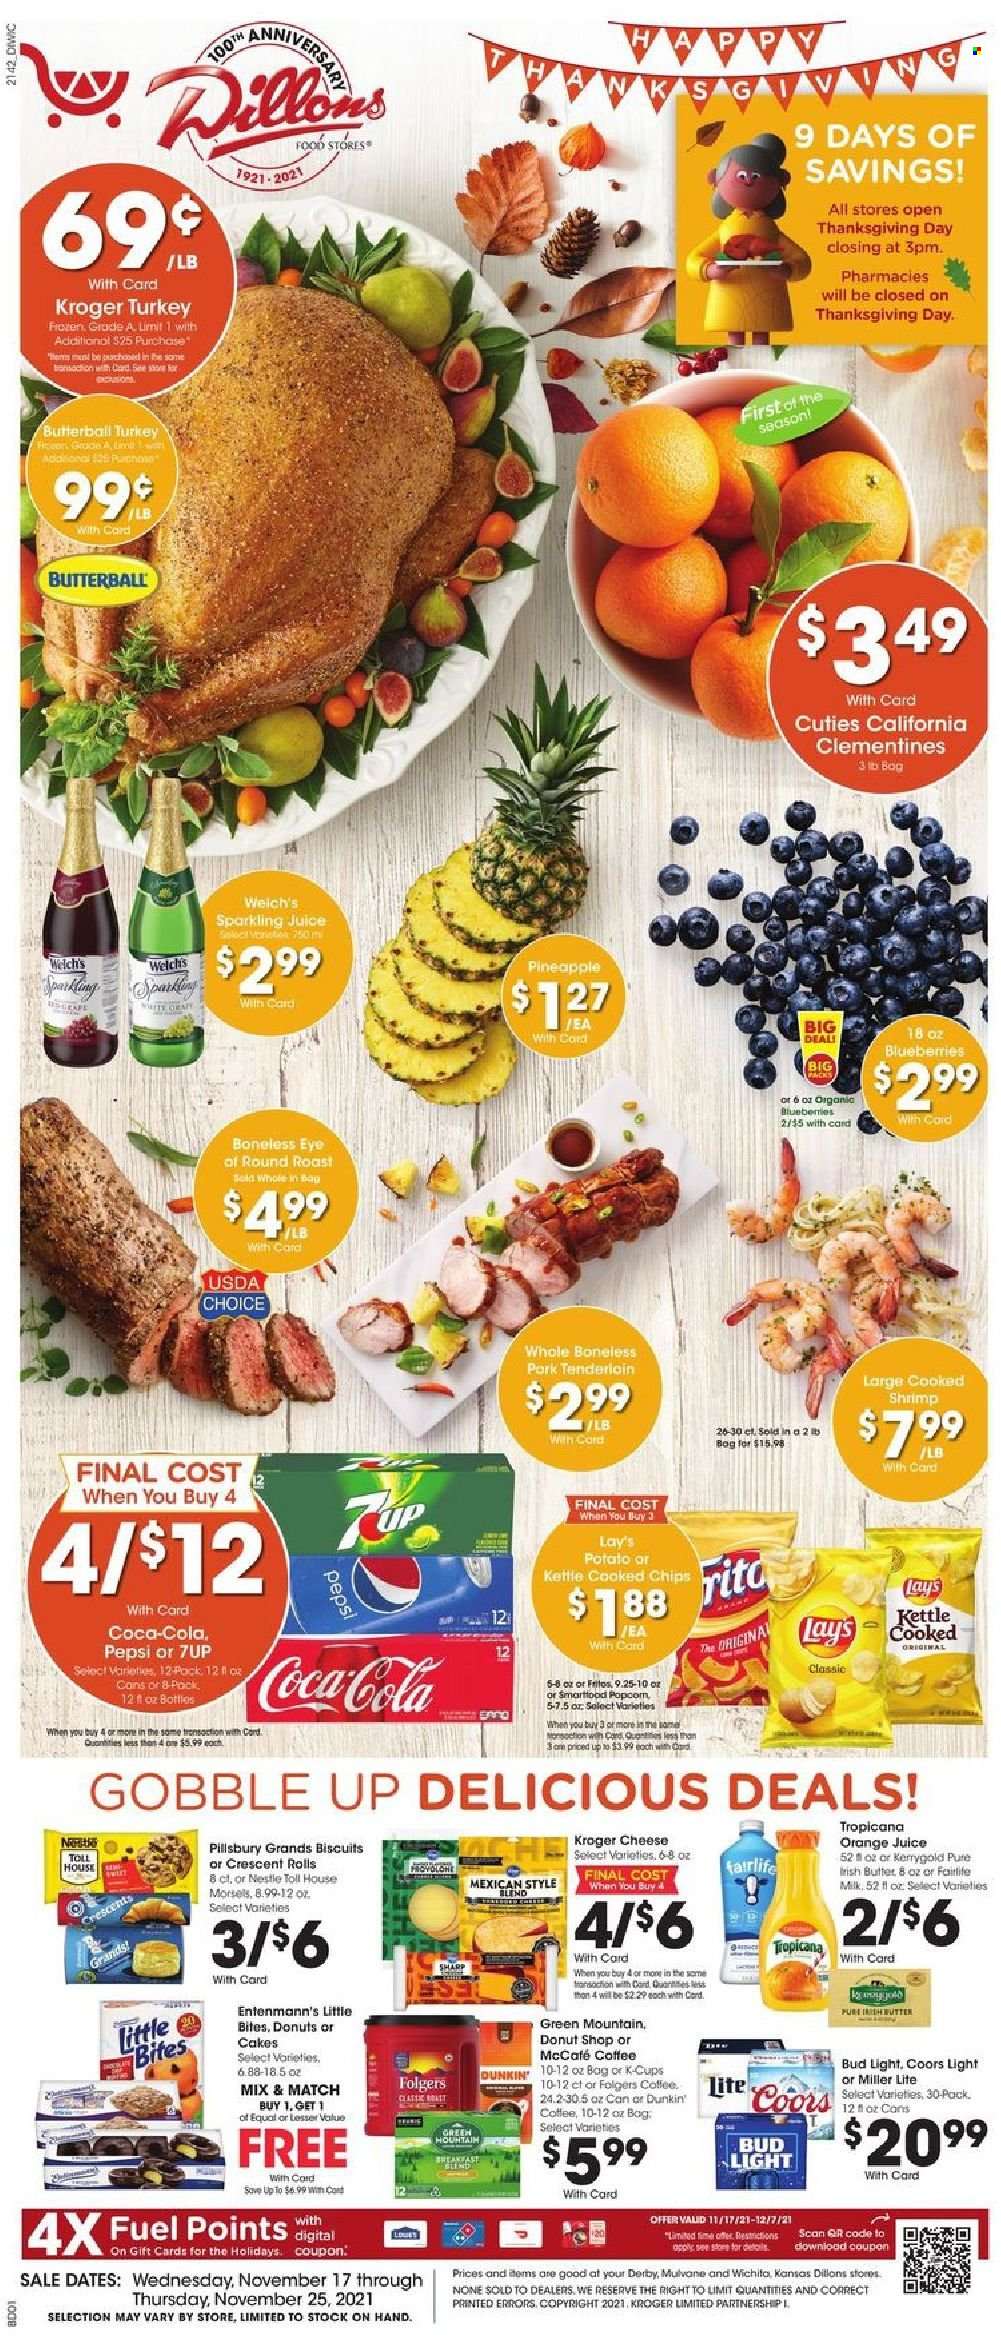 thumbnail - Dillons Flyer - 11/17/2021 - 11/25/2021 - Sales products - cake, crescent rolls, Entenmann's, blueberries, pineapple, Welch's, shrimps, Pillsbury, Butterball, cheese, Nestlé, biscuit, Little Bites, chips, Lay’s, kettle, Coca-Cola, Pepsi, orange juice, juice, 7UP, sparkling juice, coffee, Folgers, coffee capsules, McCafe, K-Cups, Green Mountain, beer, Bud Light, beef meat, eye of round, round roast, pork meat, pork tenderloin, Sharp, clementines, Miller Lite, Coors. Page 1.